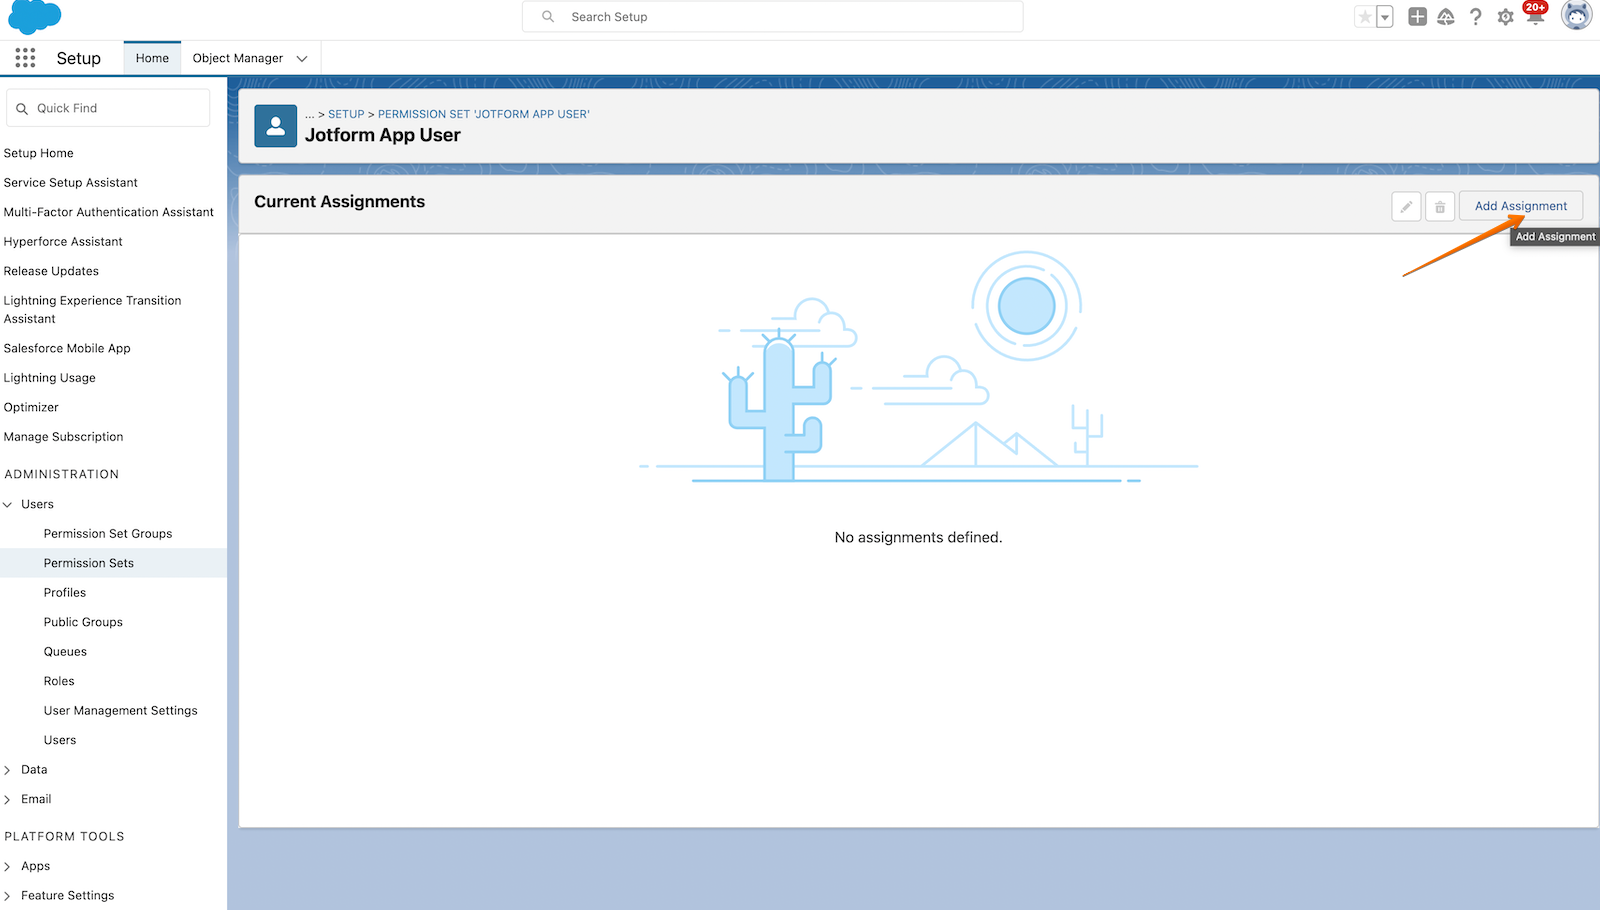 Why doesnt jotform become an OAuth Salesforce app? Image 5 Screenshot 214